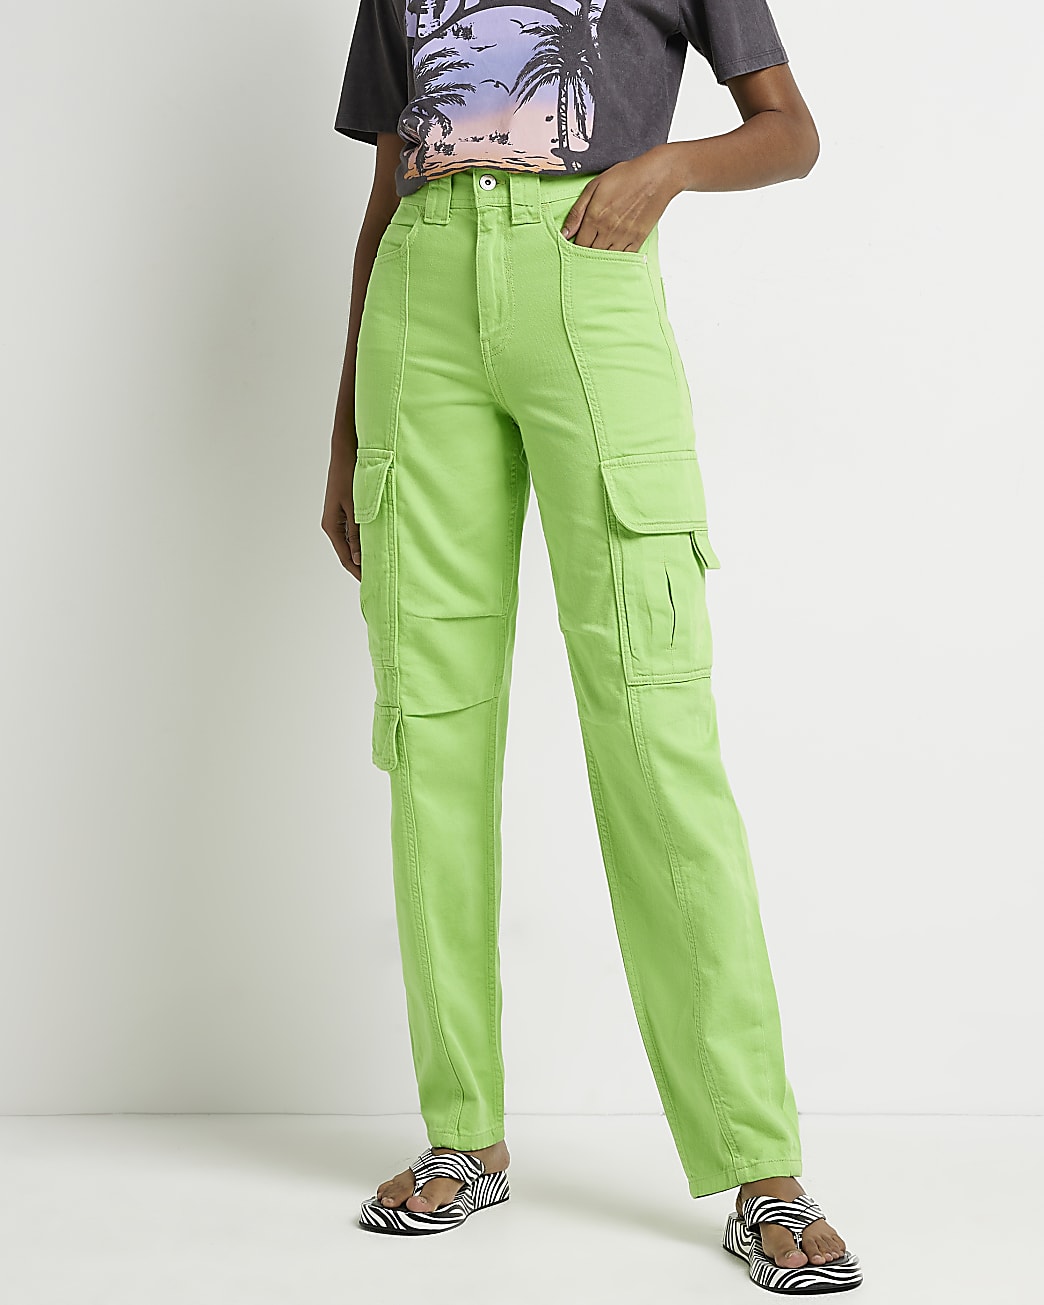 Green high waisted cargo jeans, River Island